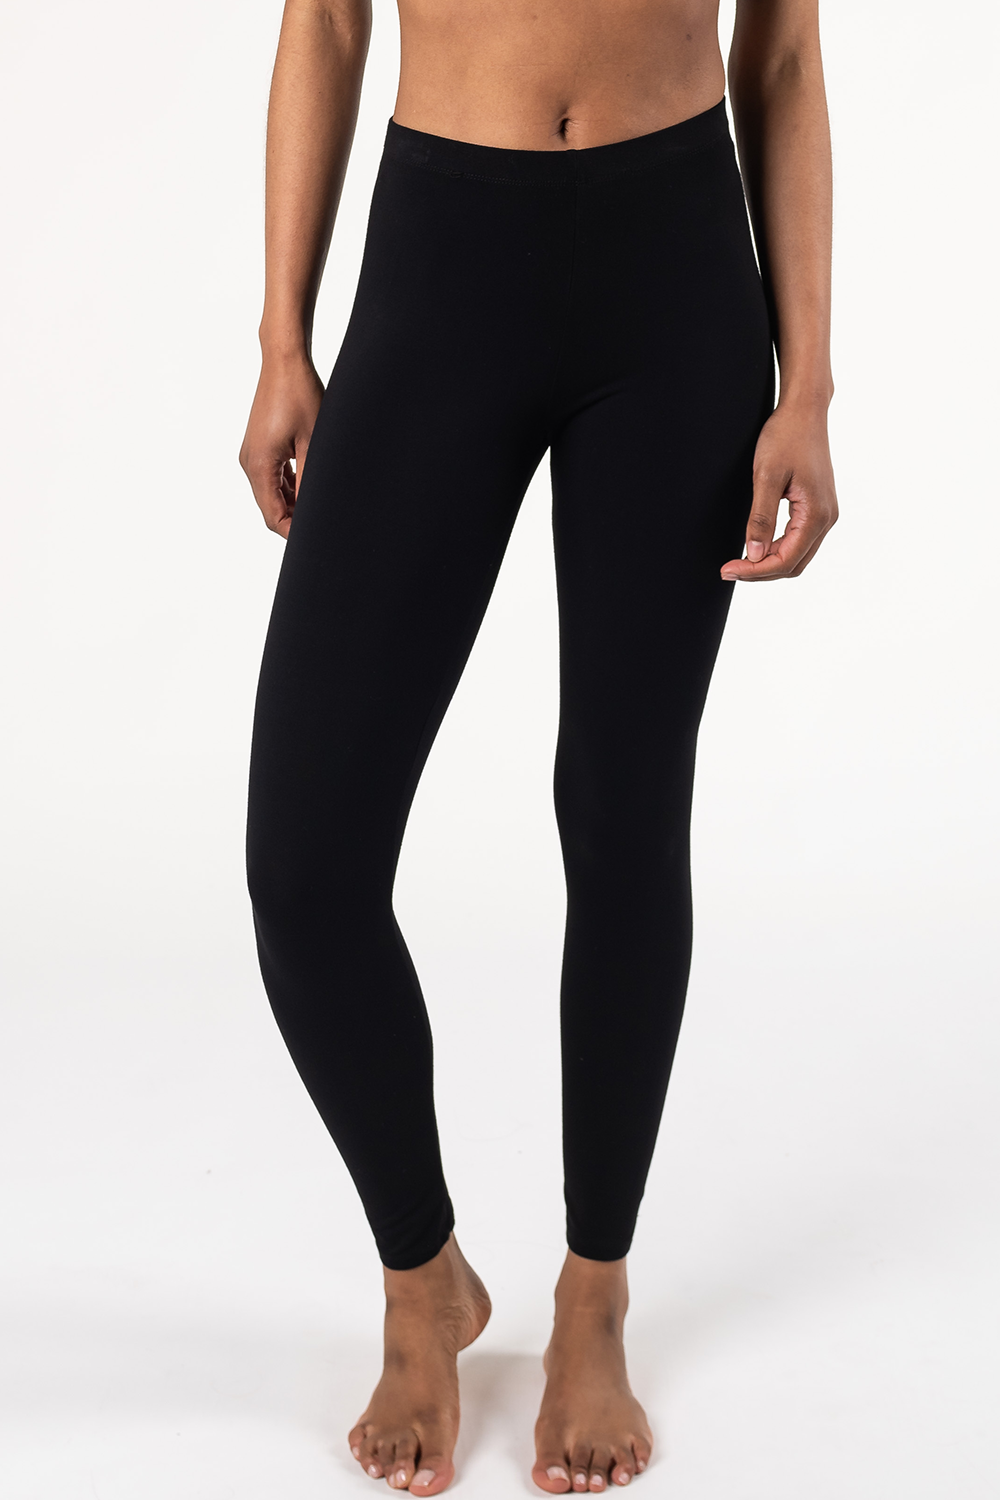 Stretchy pants for women: Seamless Stretchy Leggings Pants –  greatexpectation